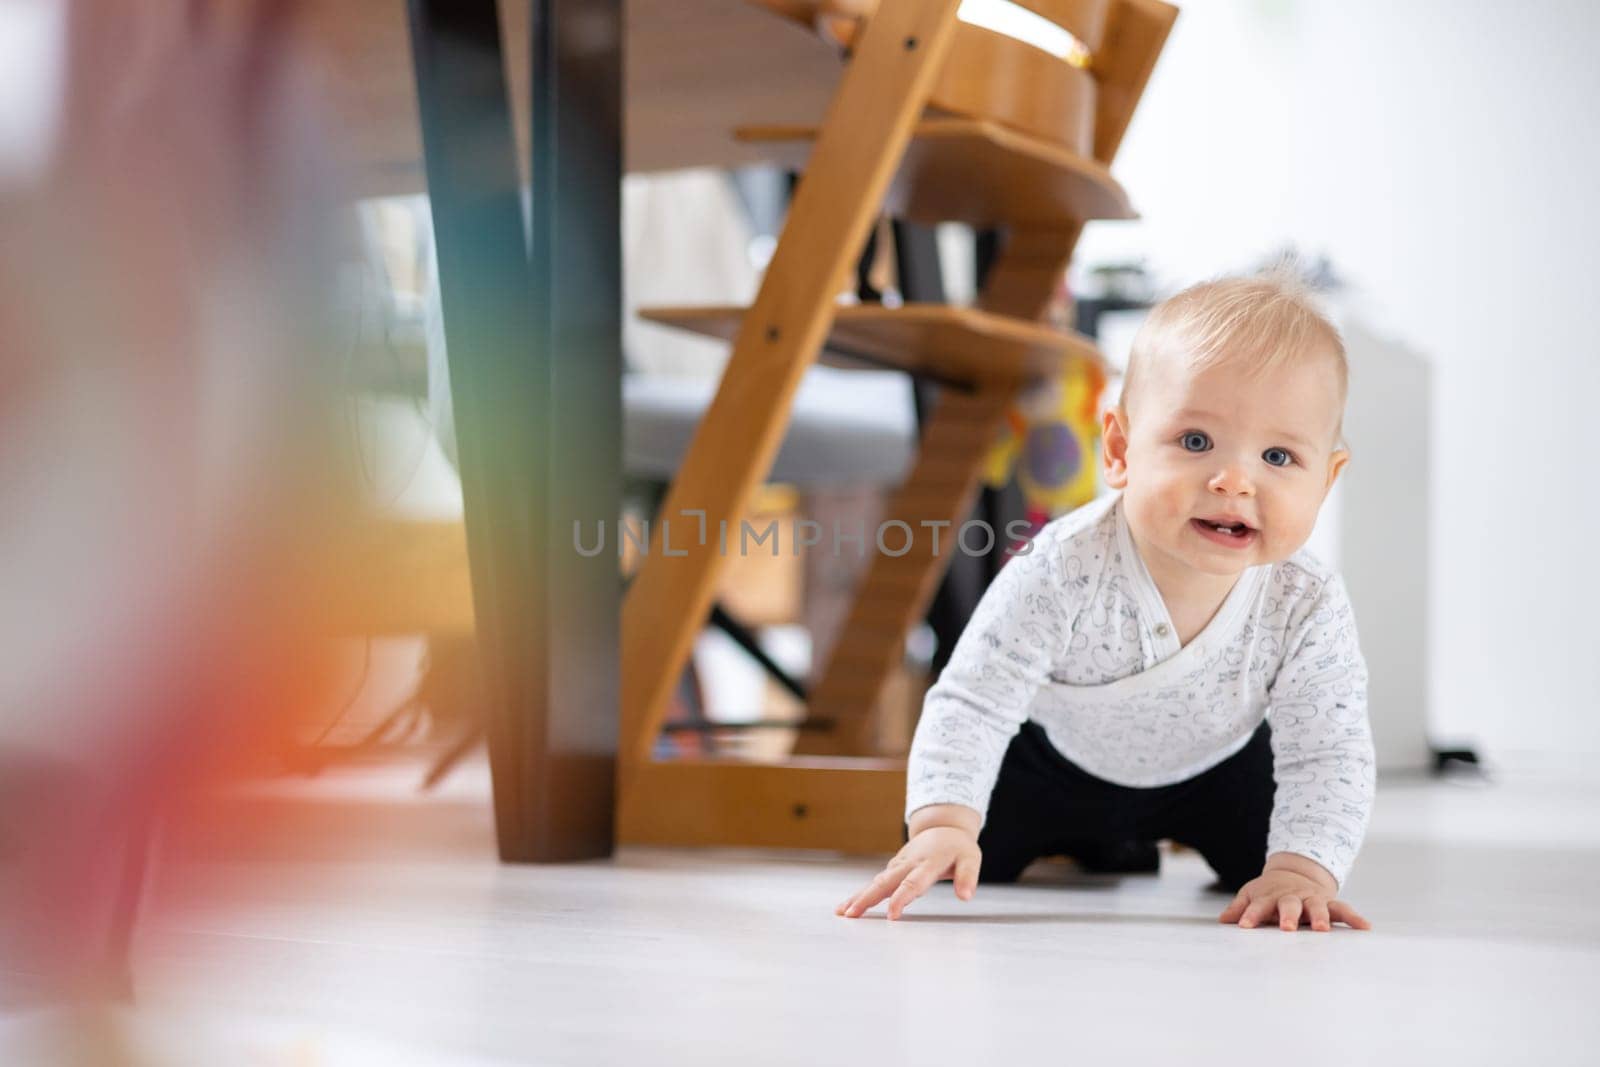 Cute infant baby boy crawling under dining room table at home. Baby playing at home.